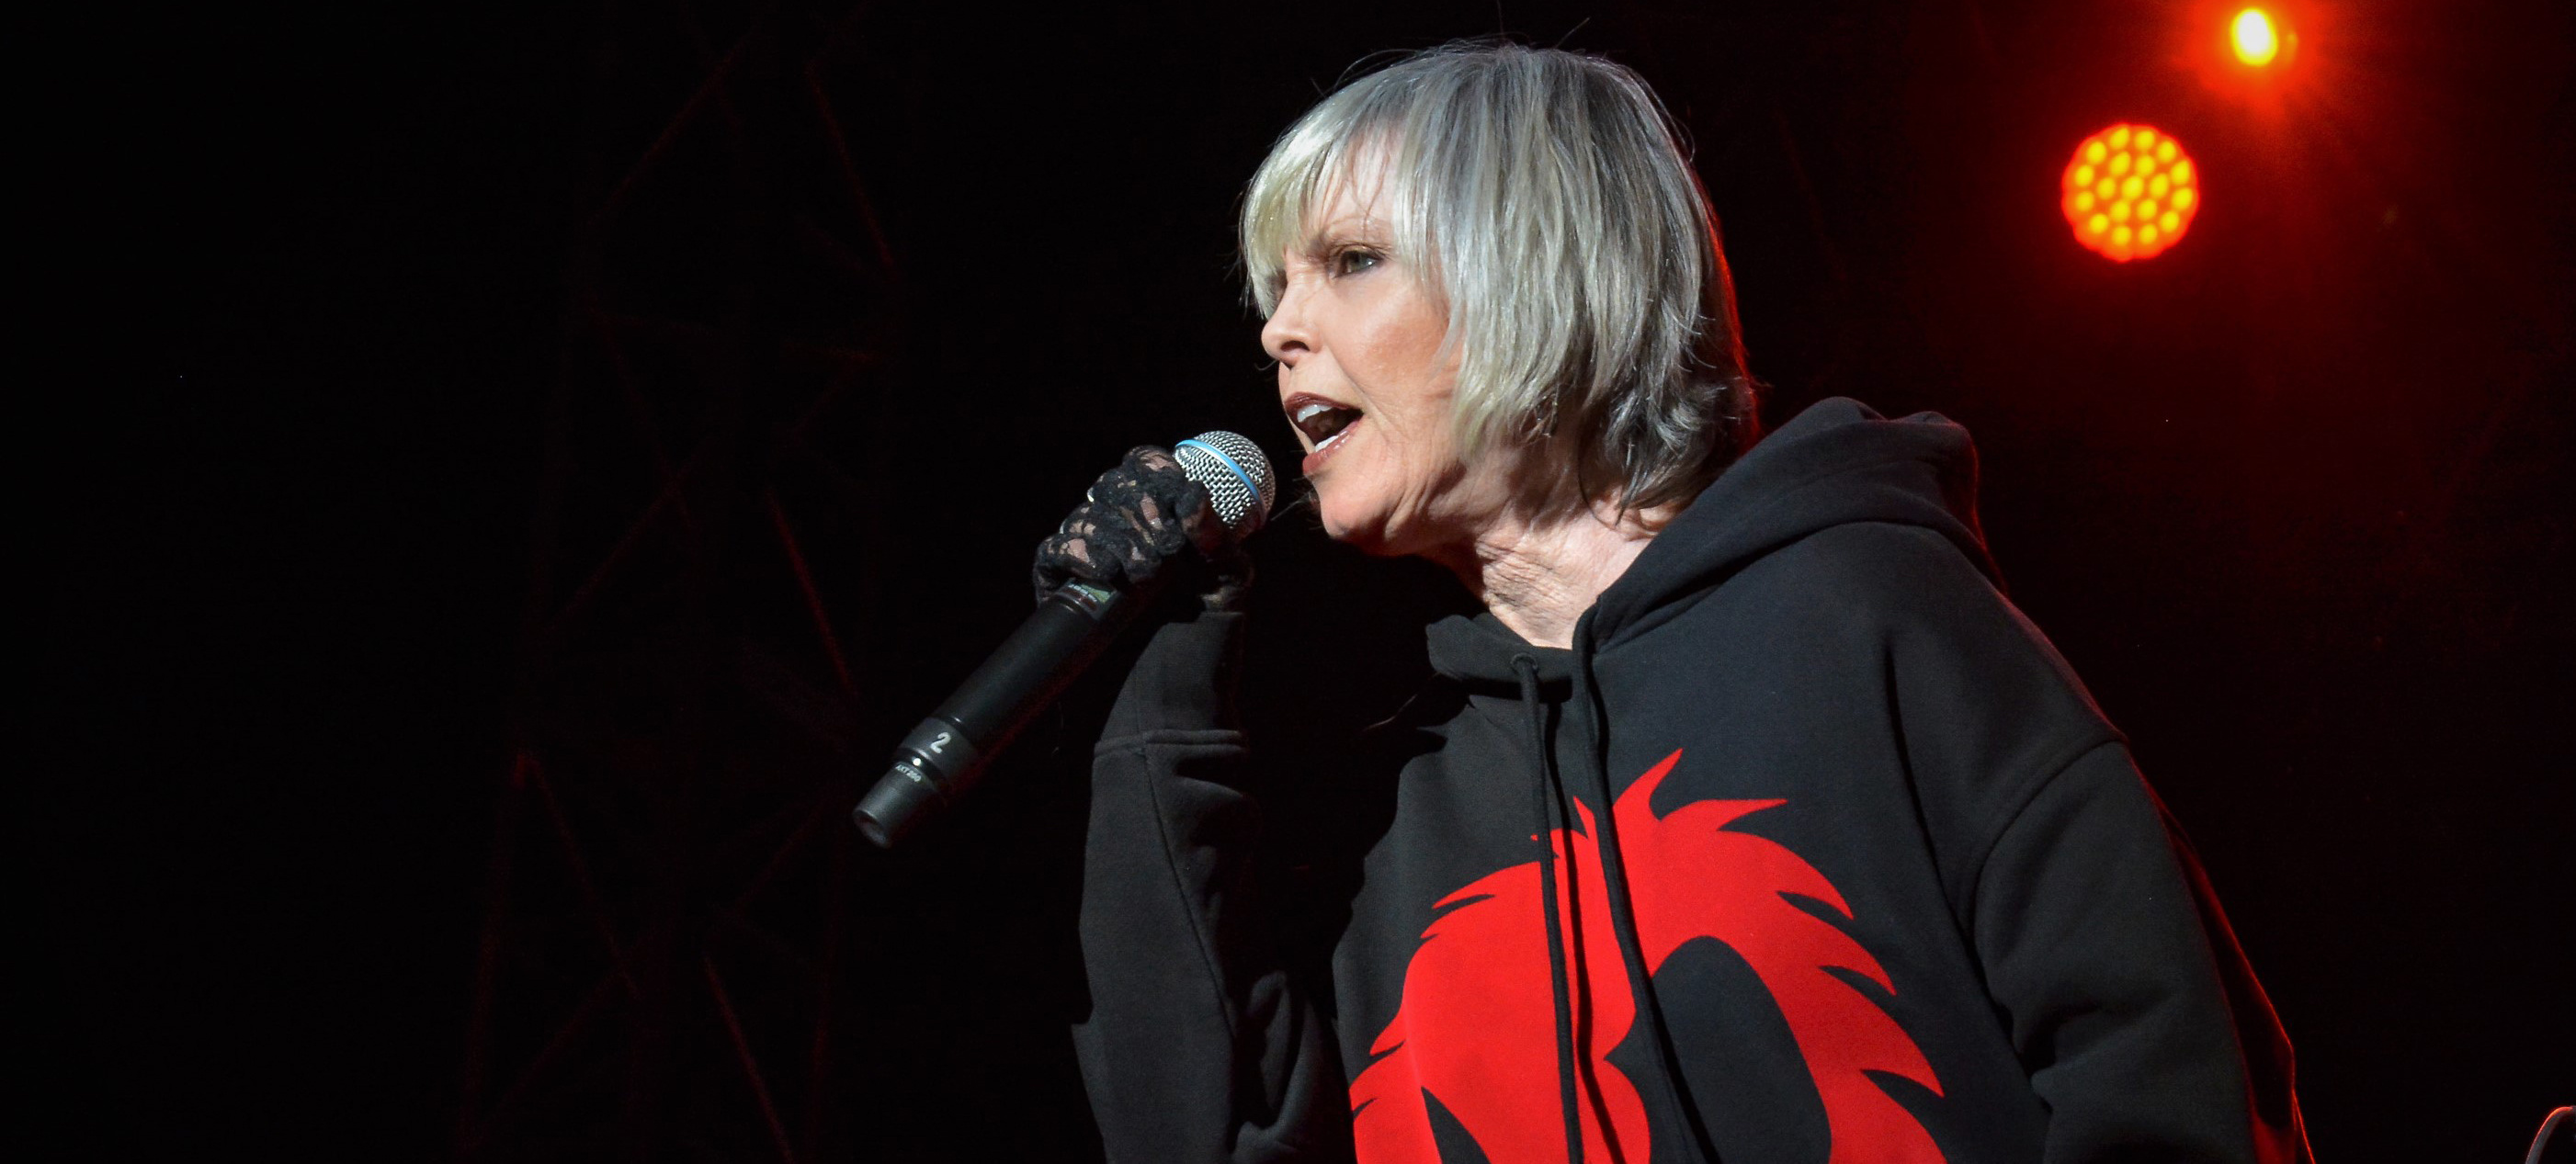 Pat Benatar Won't Sing 'Hit Me With Your Best Shot' in Light of Mass Shootings 2810x1270